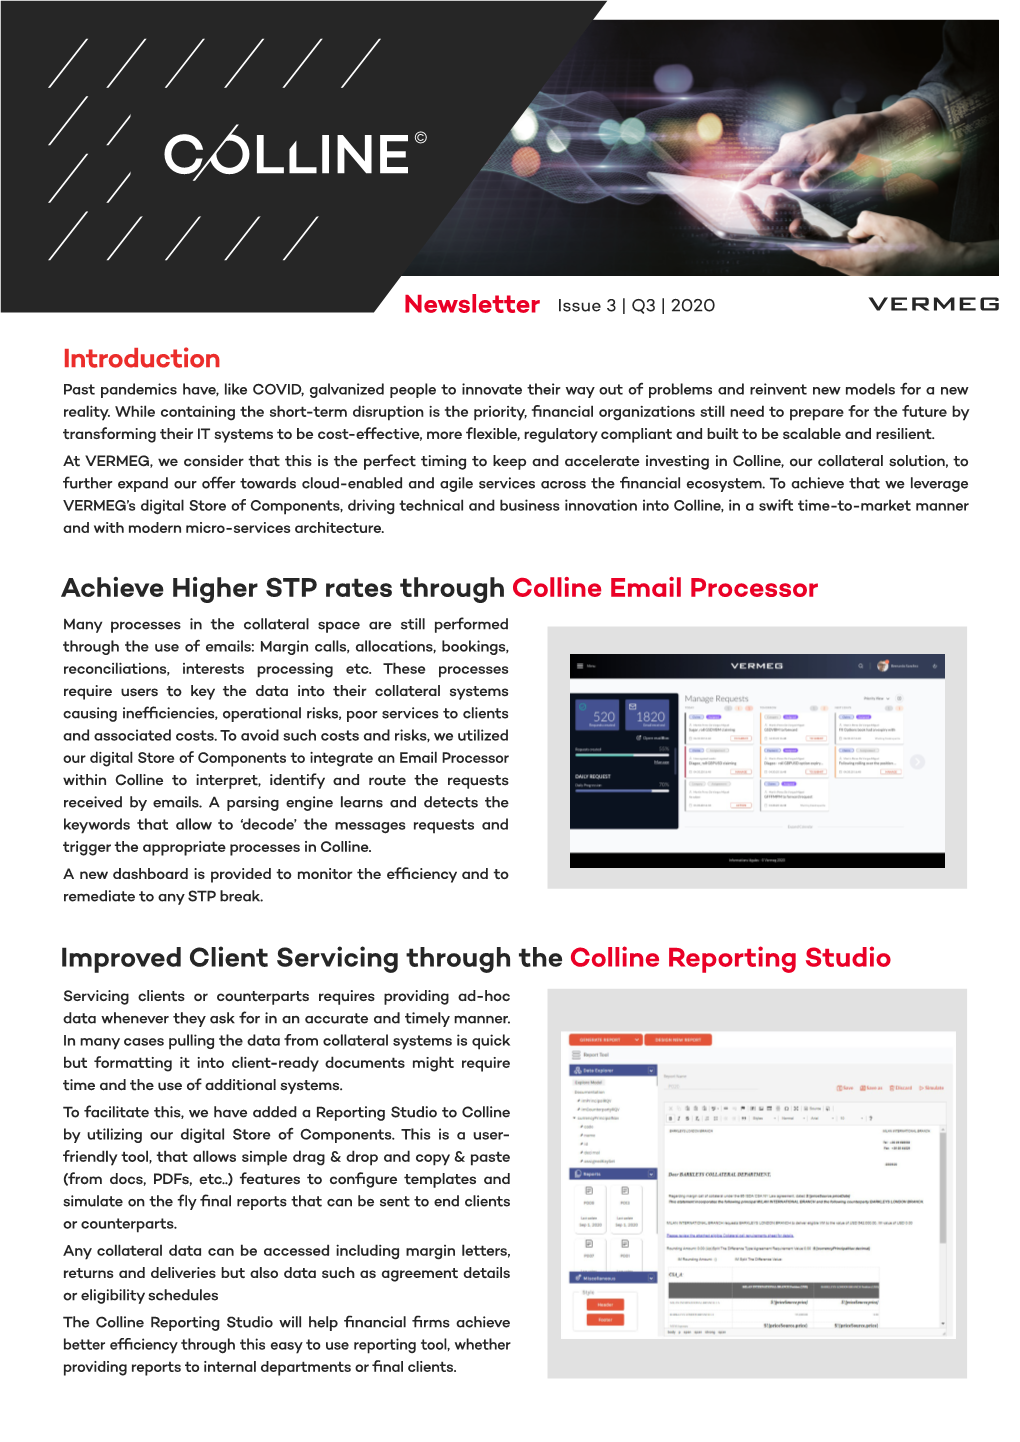 Introduction Achieve Higher STP Rates Through Colline Email